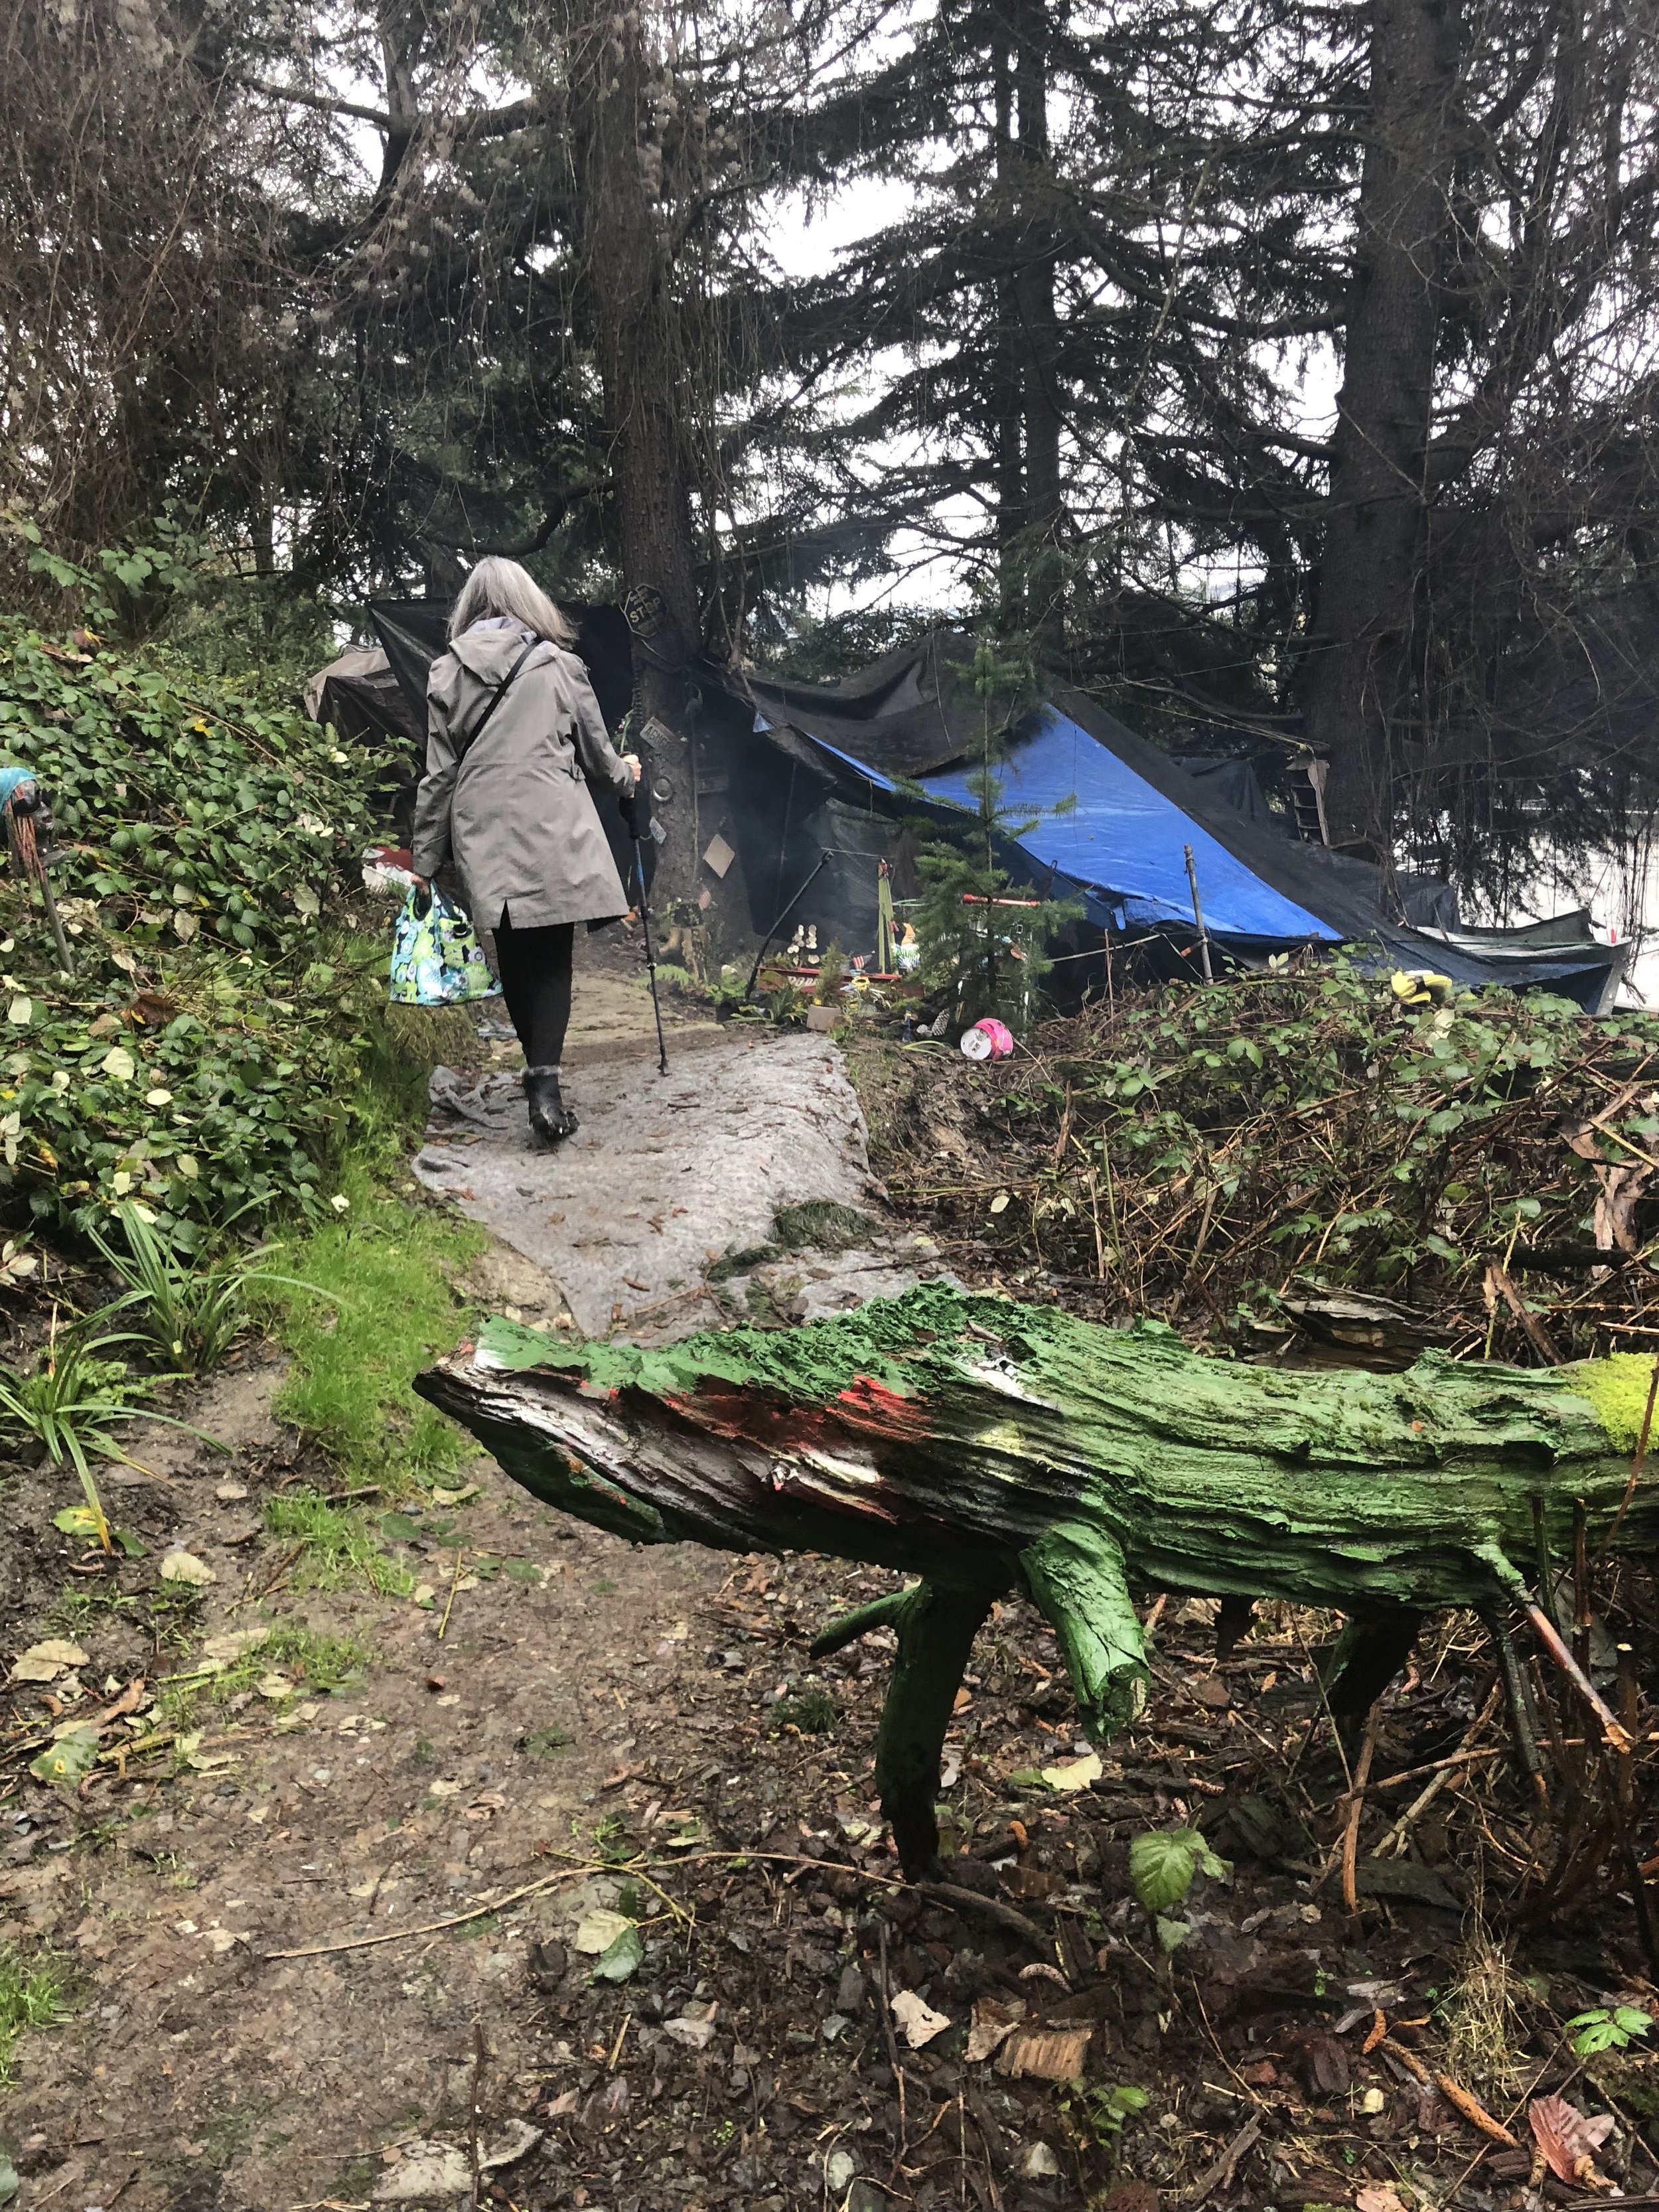 “Blowing in the Seattle Winds”; Reflection from our Communications Manager Clàudia, on her first outreach trip with Debbie Monda